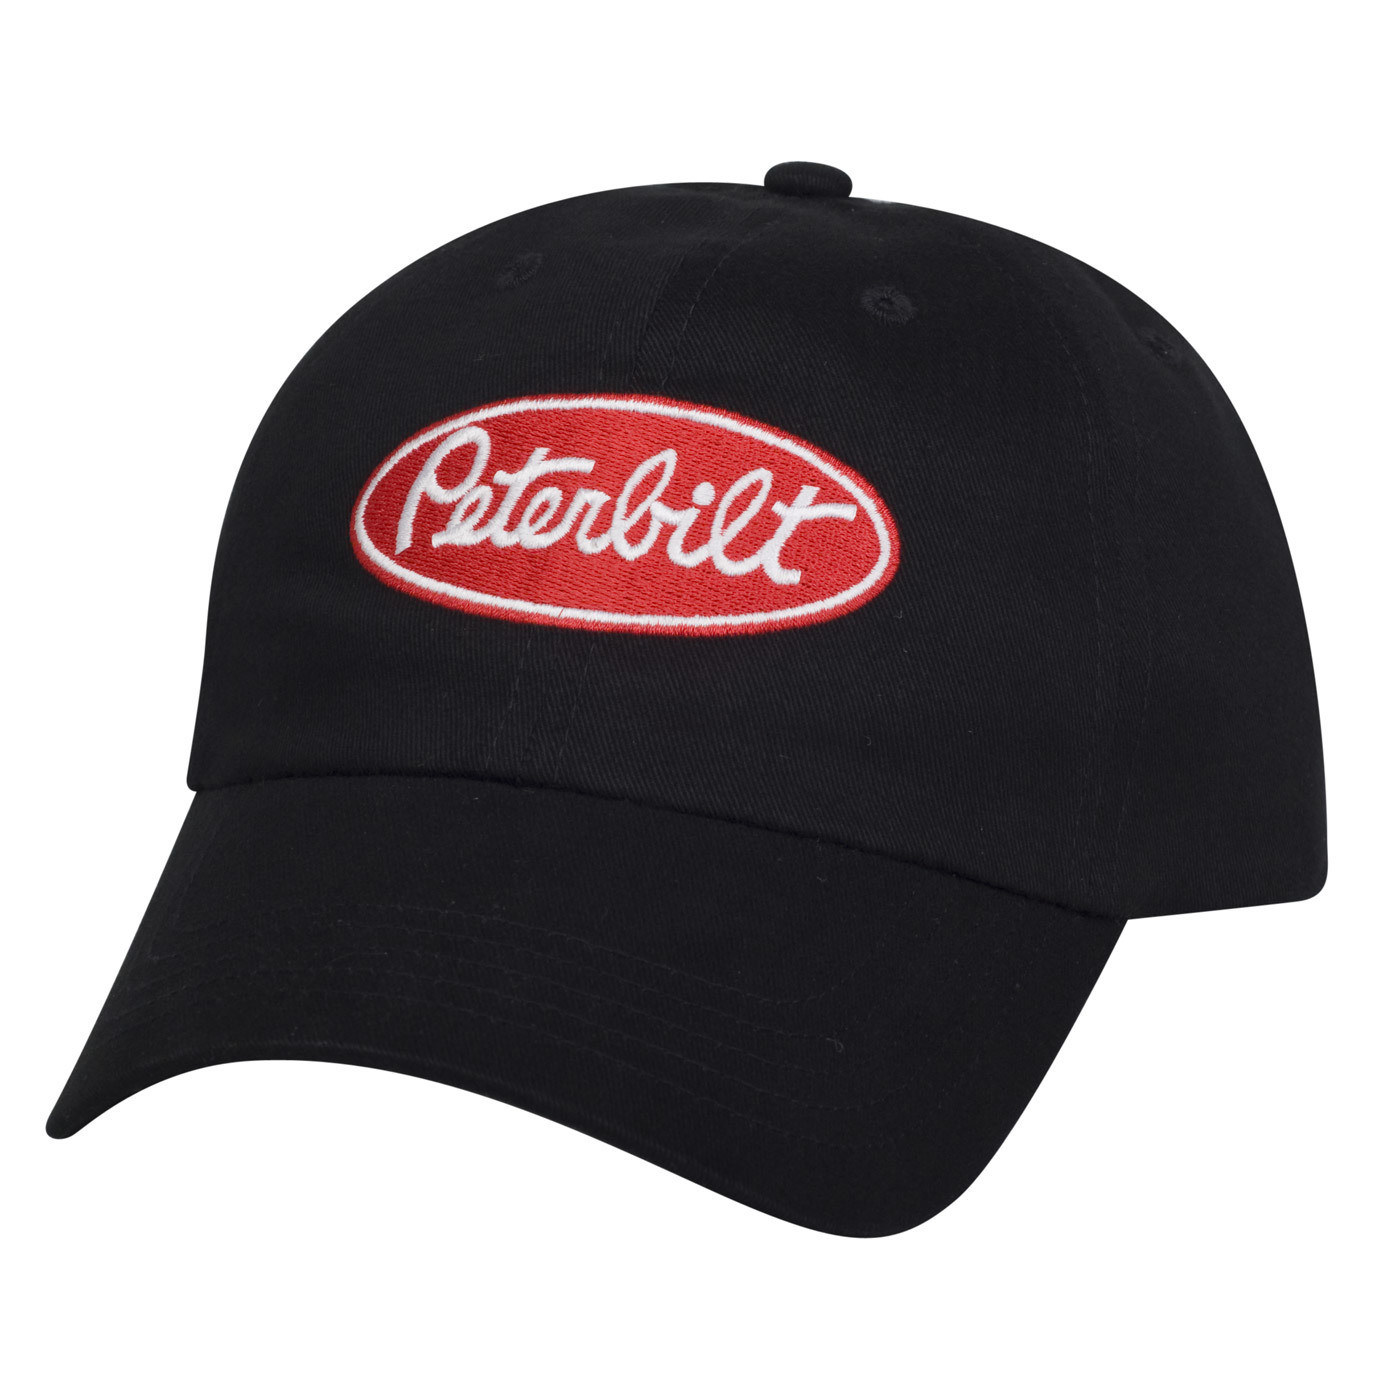 PETERBILT HAT          CLASS PAYS TRUCKERS CAP FREE SHIPPING IN USA PATCH 